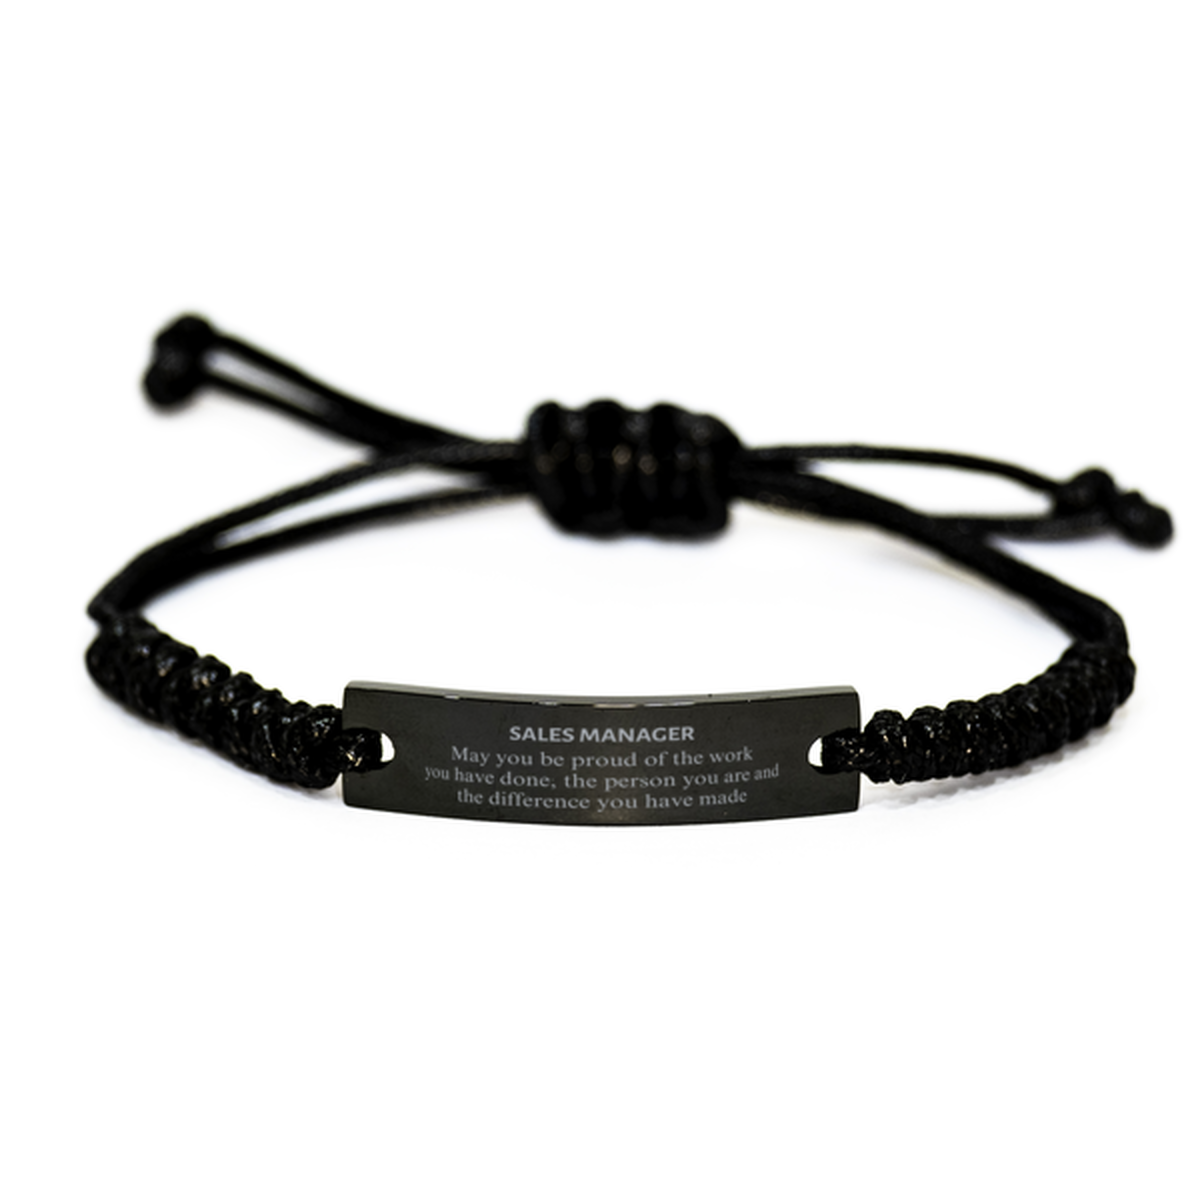 Sales Manager May you be proud of the work you have done, Retirement Sales Manager Black Rope Bracelet for Colleague Appreciation Gifts Amazing for Sales Manager